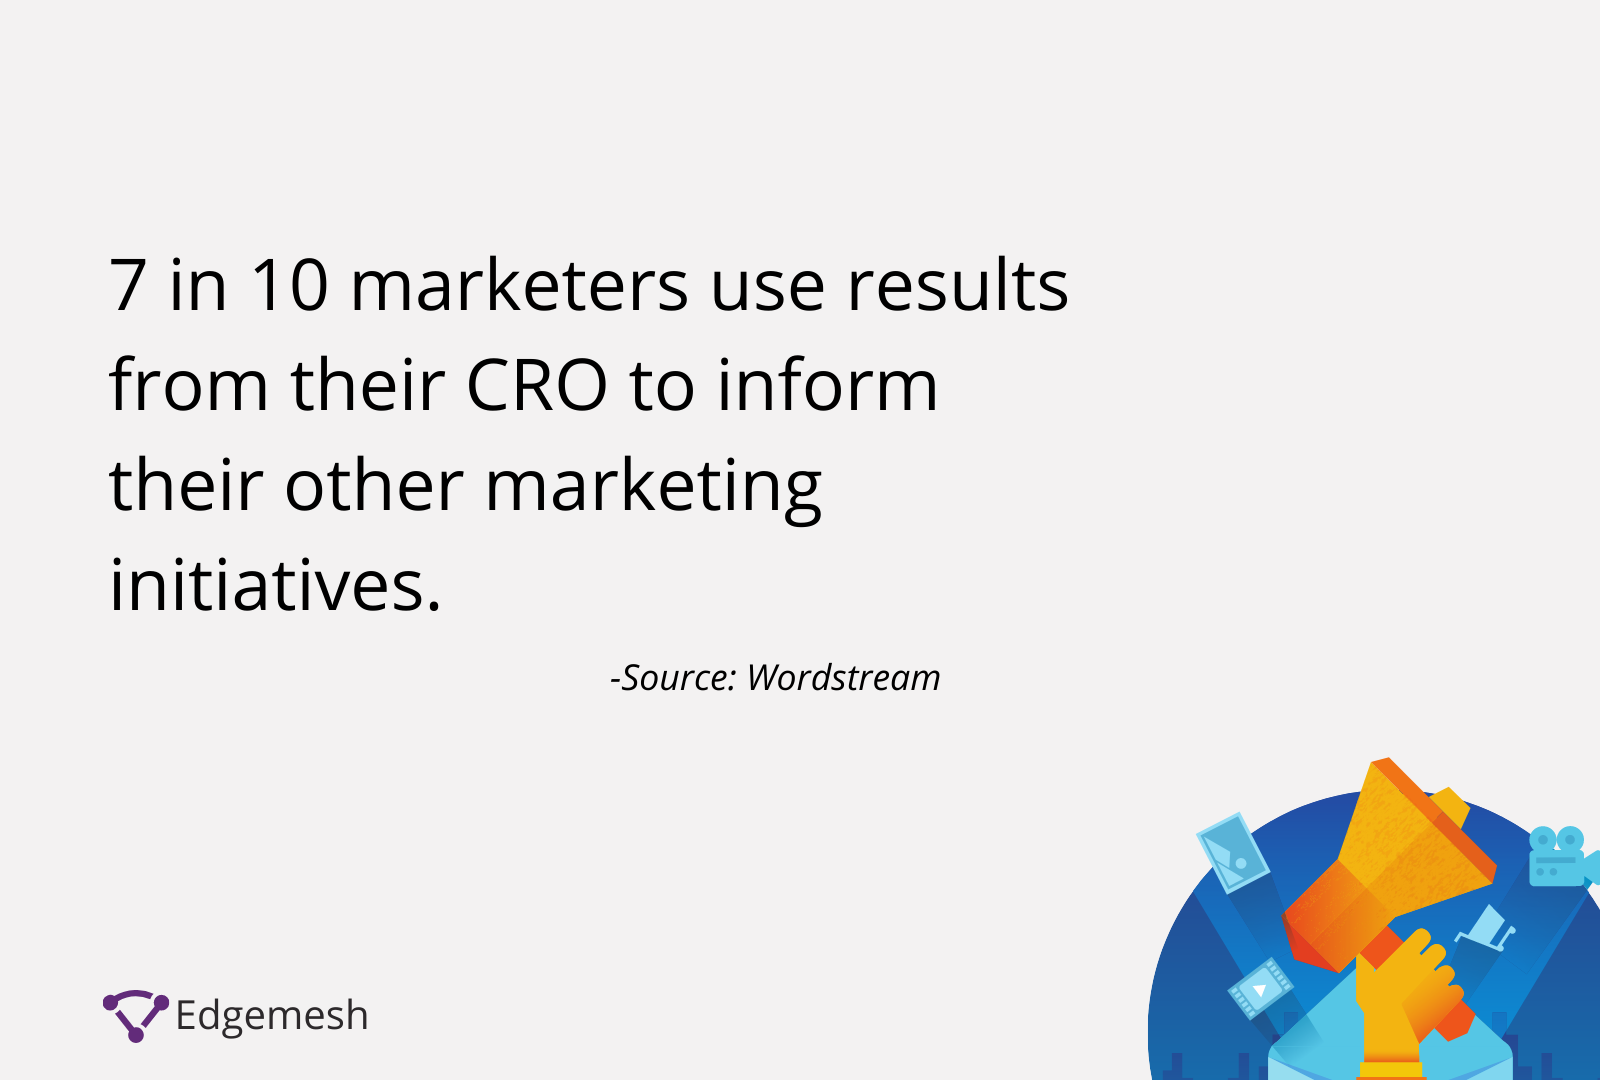 7 in 10 marketers use result from their CRO to inform the other marketing initiatives